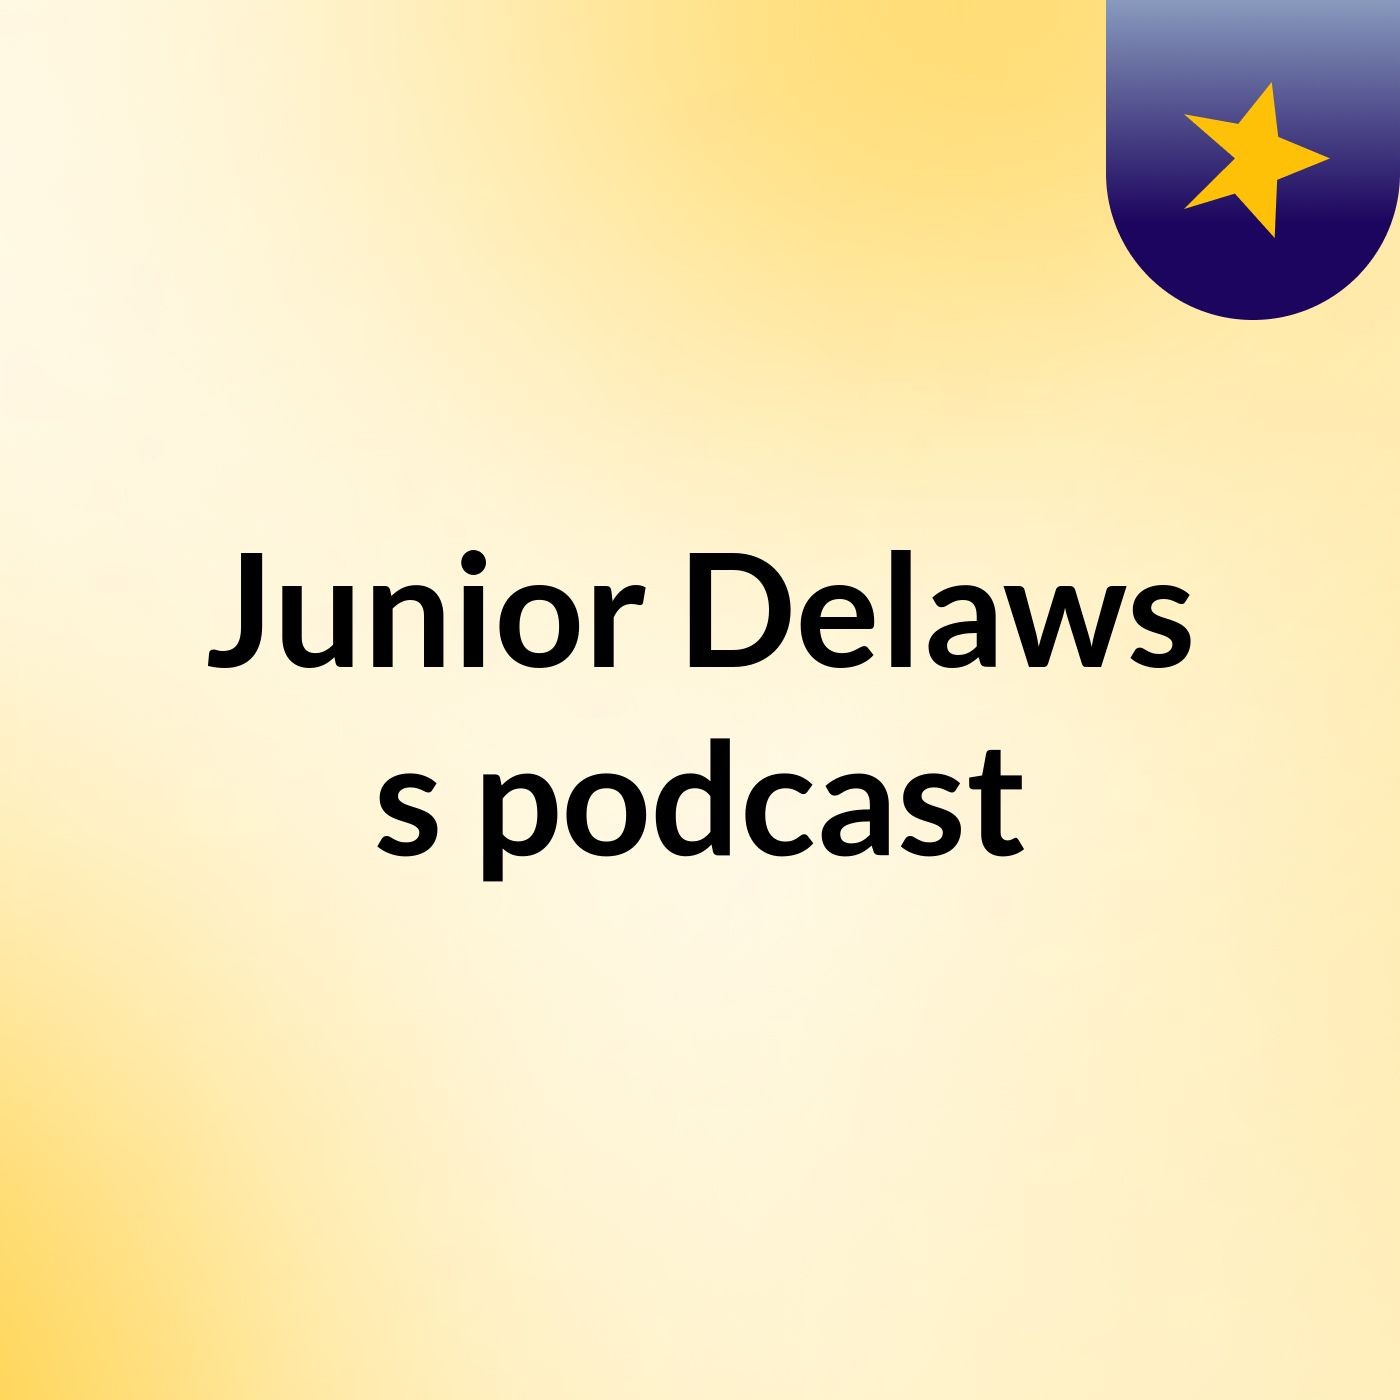 Junior Delaws's podcast